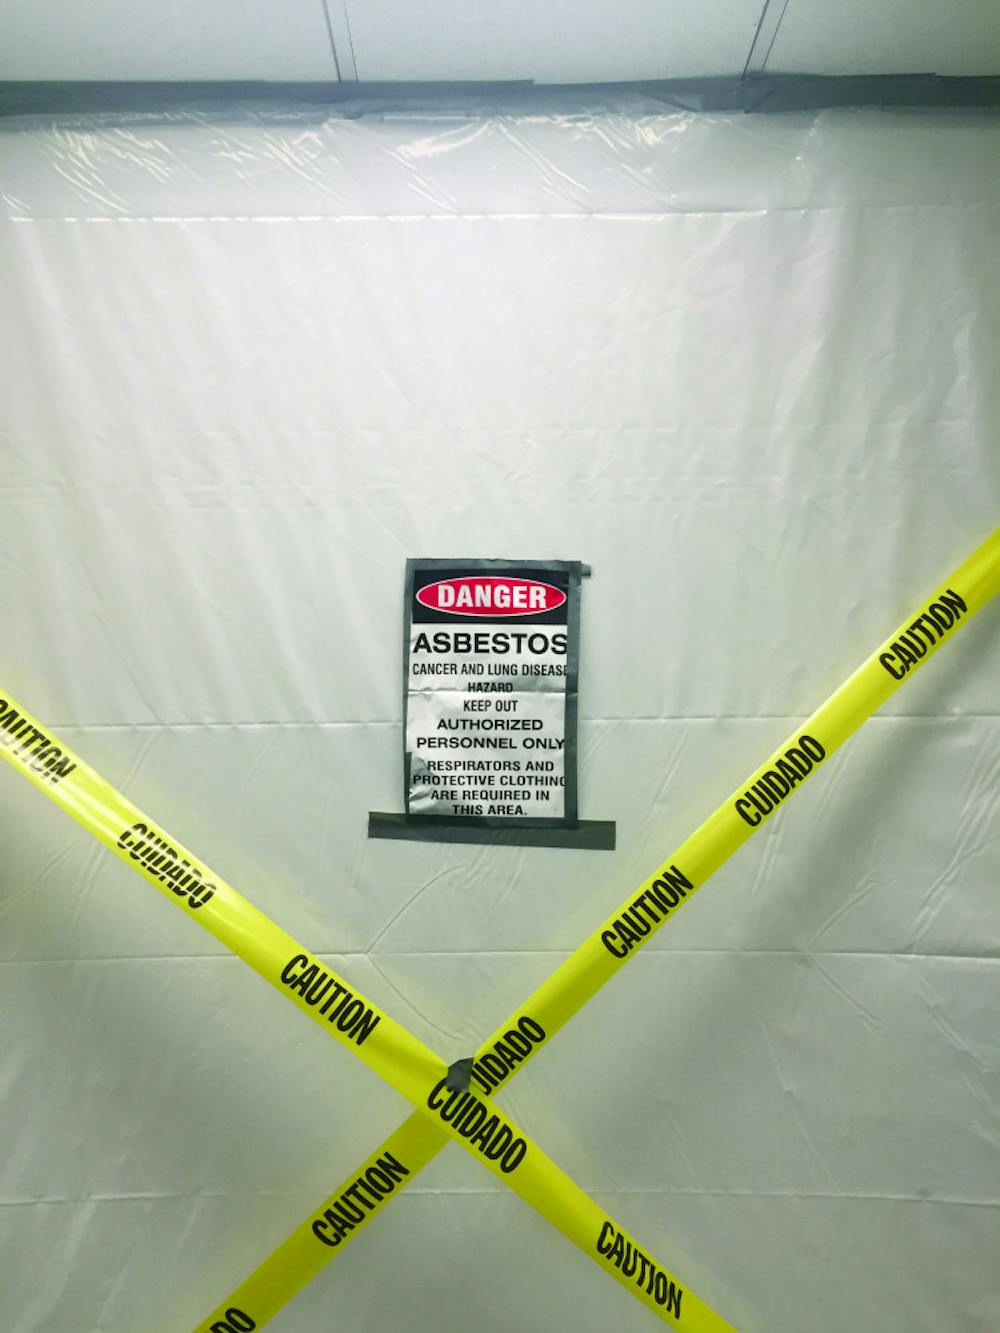 <p><span id="docs-internal-guid-9ff25327-b4ff-62fe-a68b-d36956349d6c"><span>Signs in the Reitz Union warn of asbestos. Parts of the Lower Level of the Reitz Union are closed for renovations.</span></span></p>